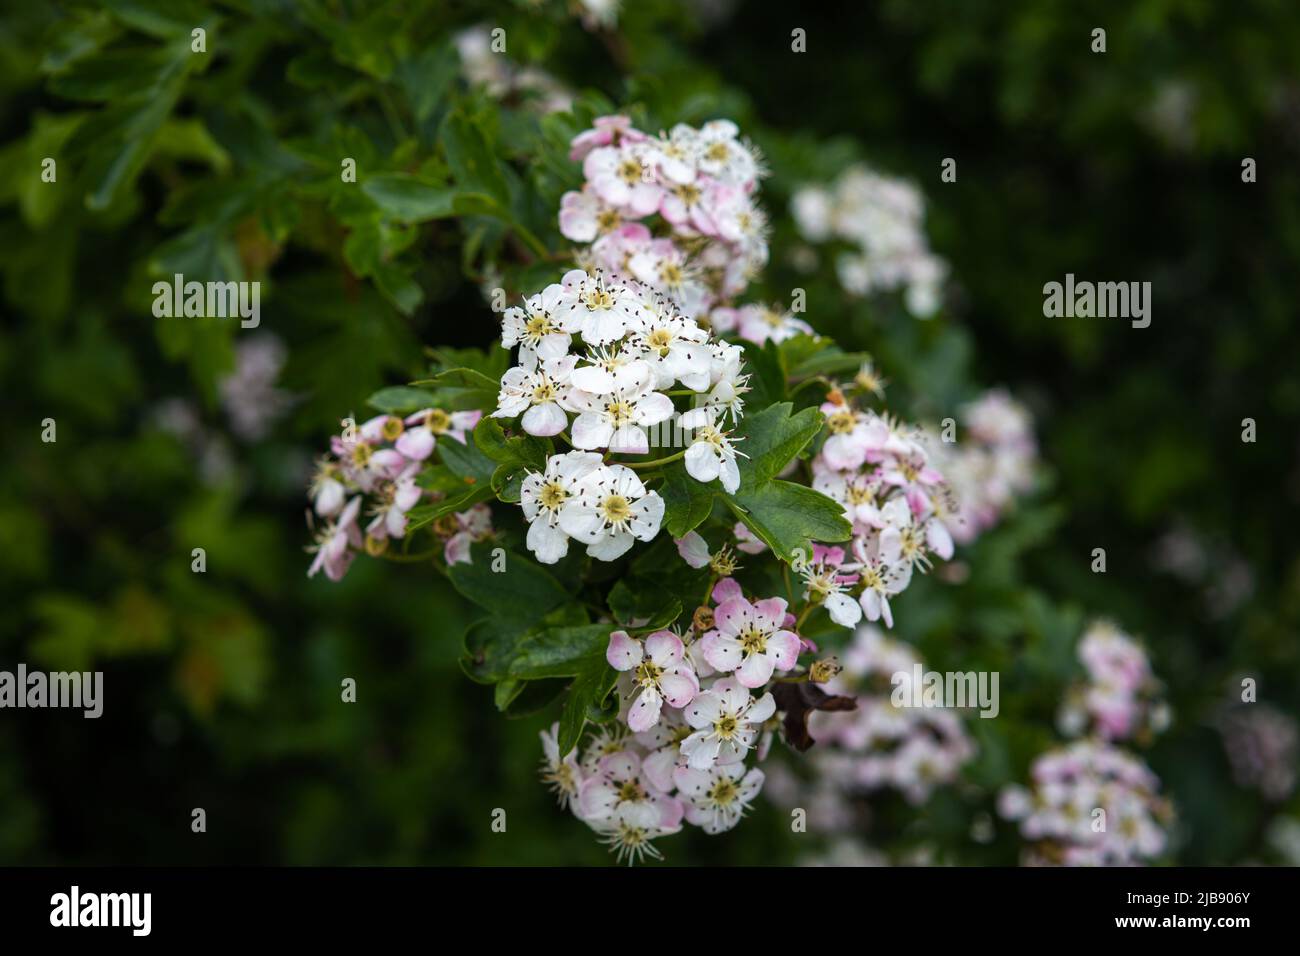 The hawthorn, a shrub from the rose family with beautiful small white flowers. Photo taken in the province of Groningen Stock Photo